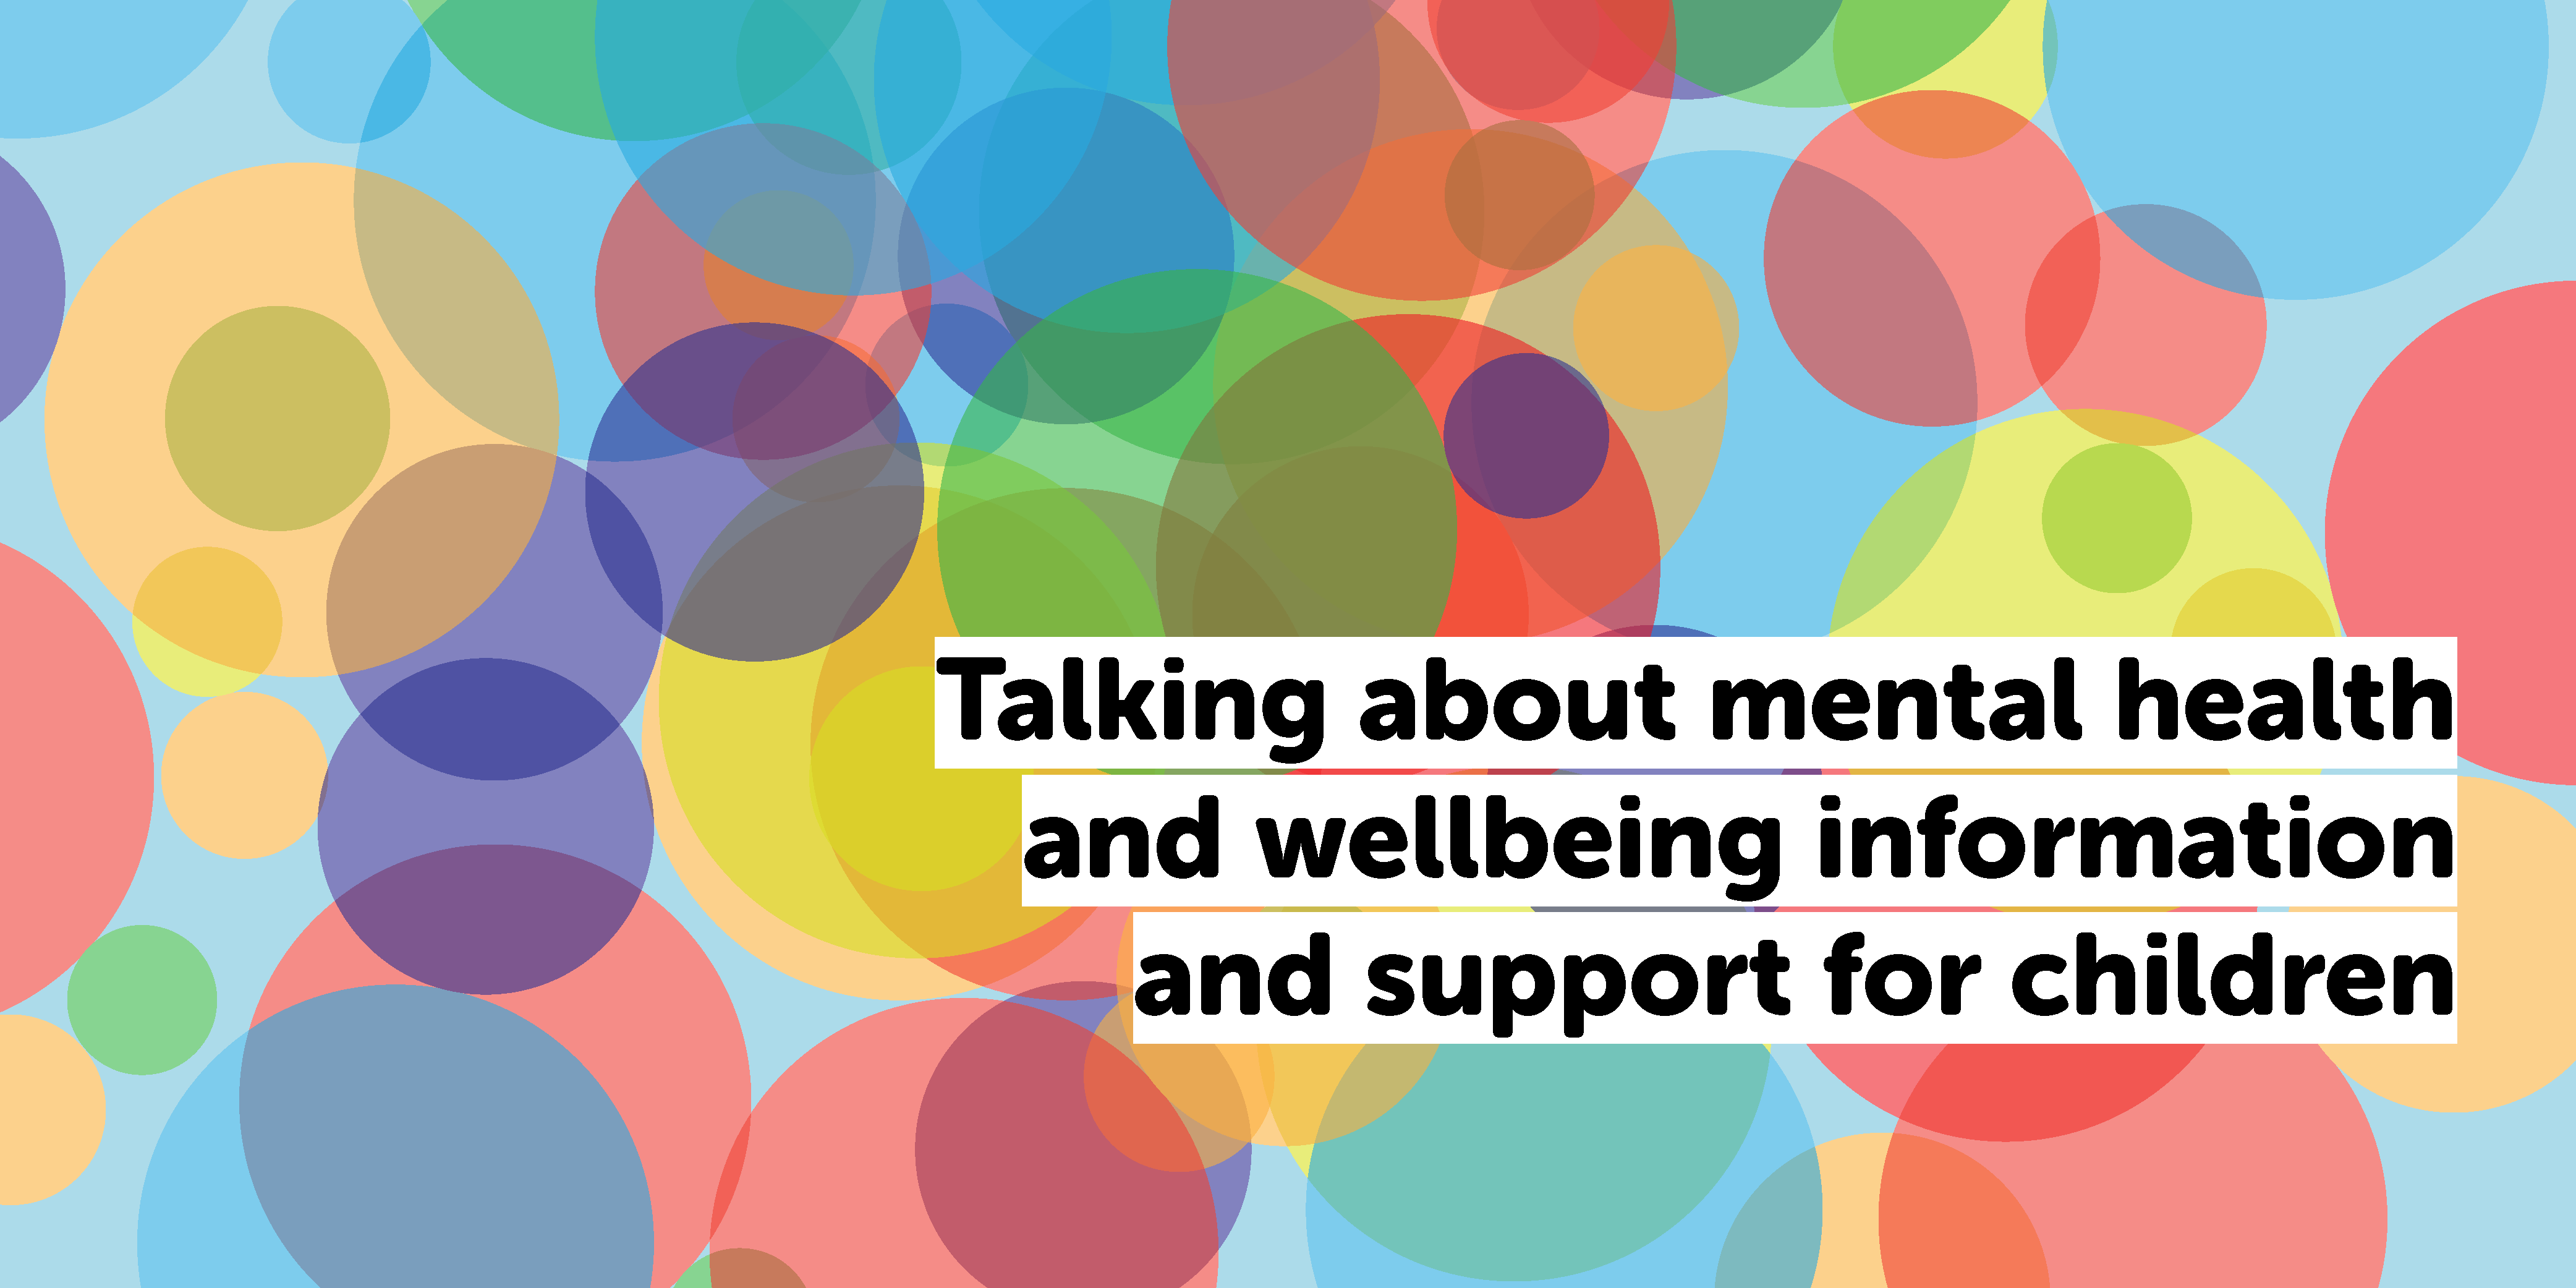 Mental health and wellbeing: Information and support